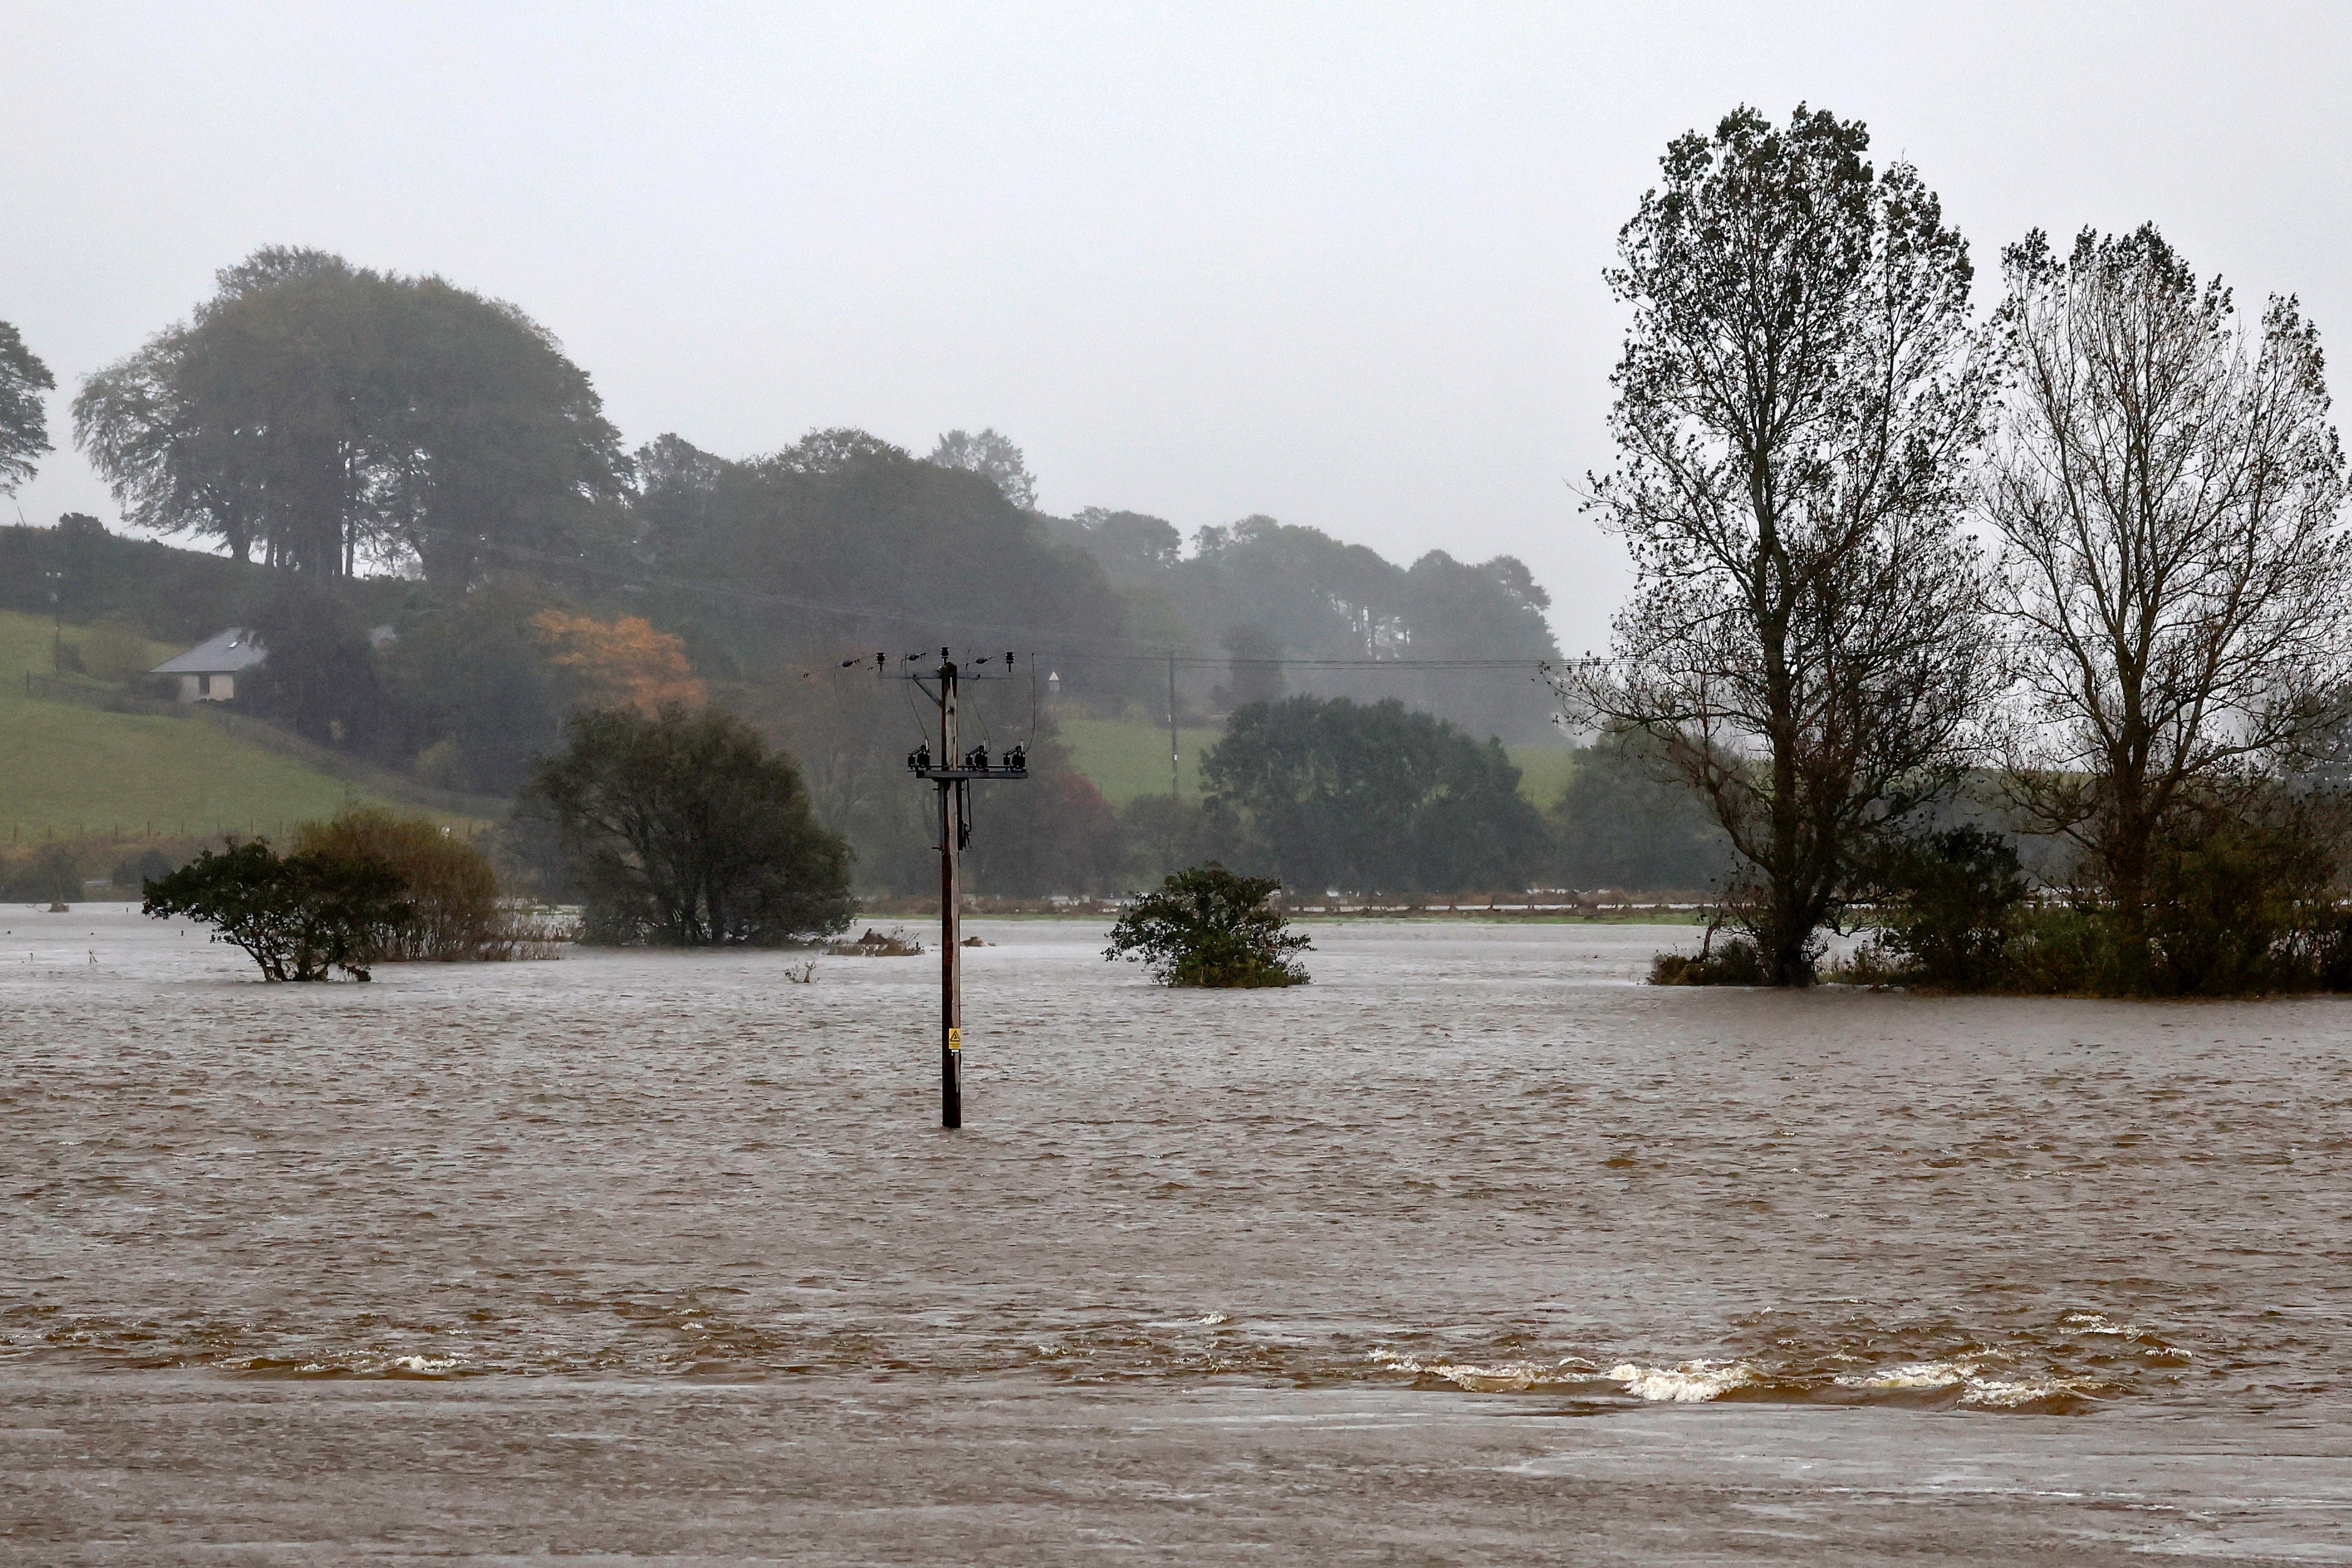 Several flood warnings were issued along the length of the River Don as heavy rain continues in Kintore, Scotland